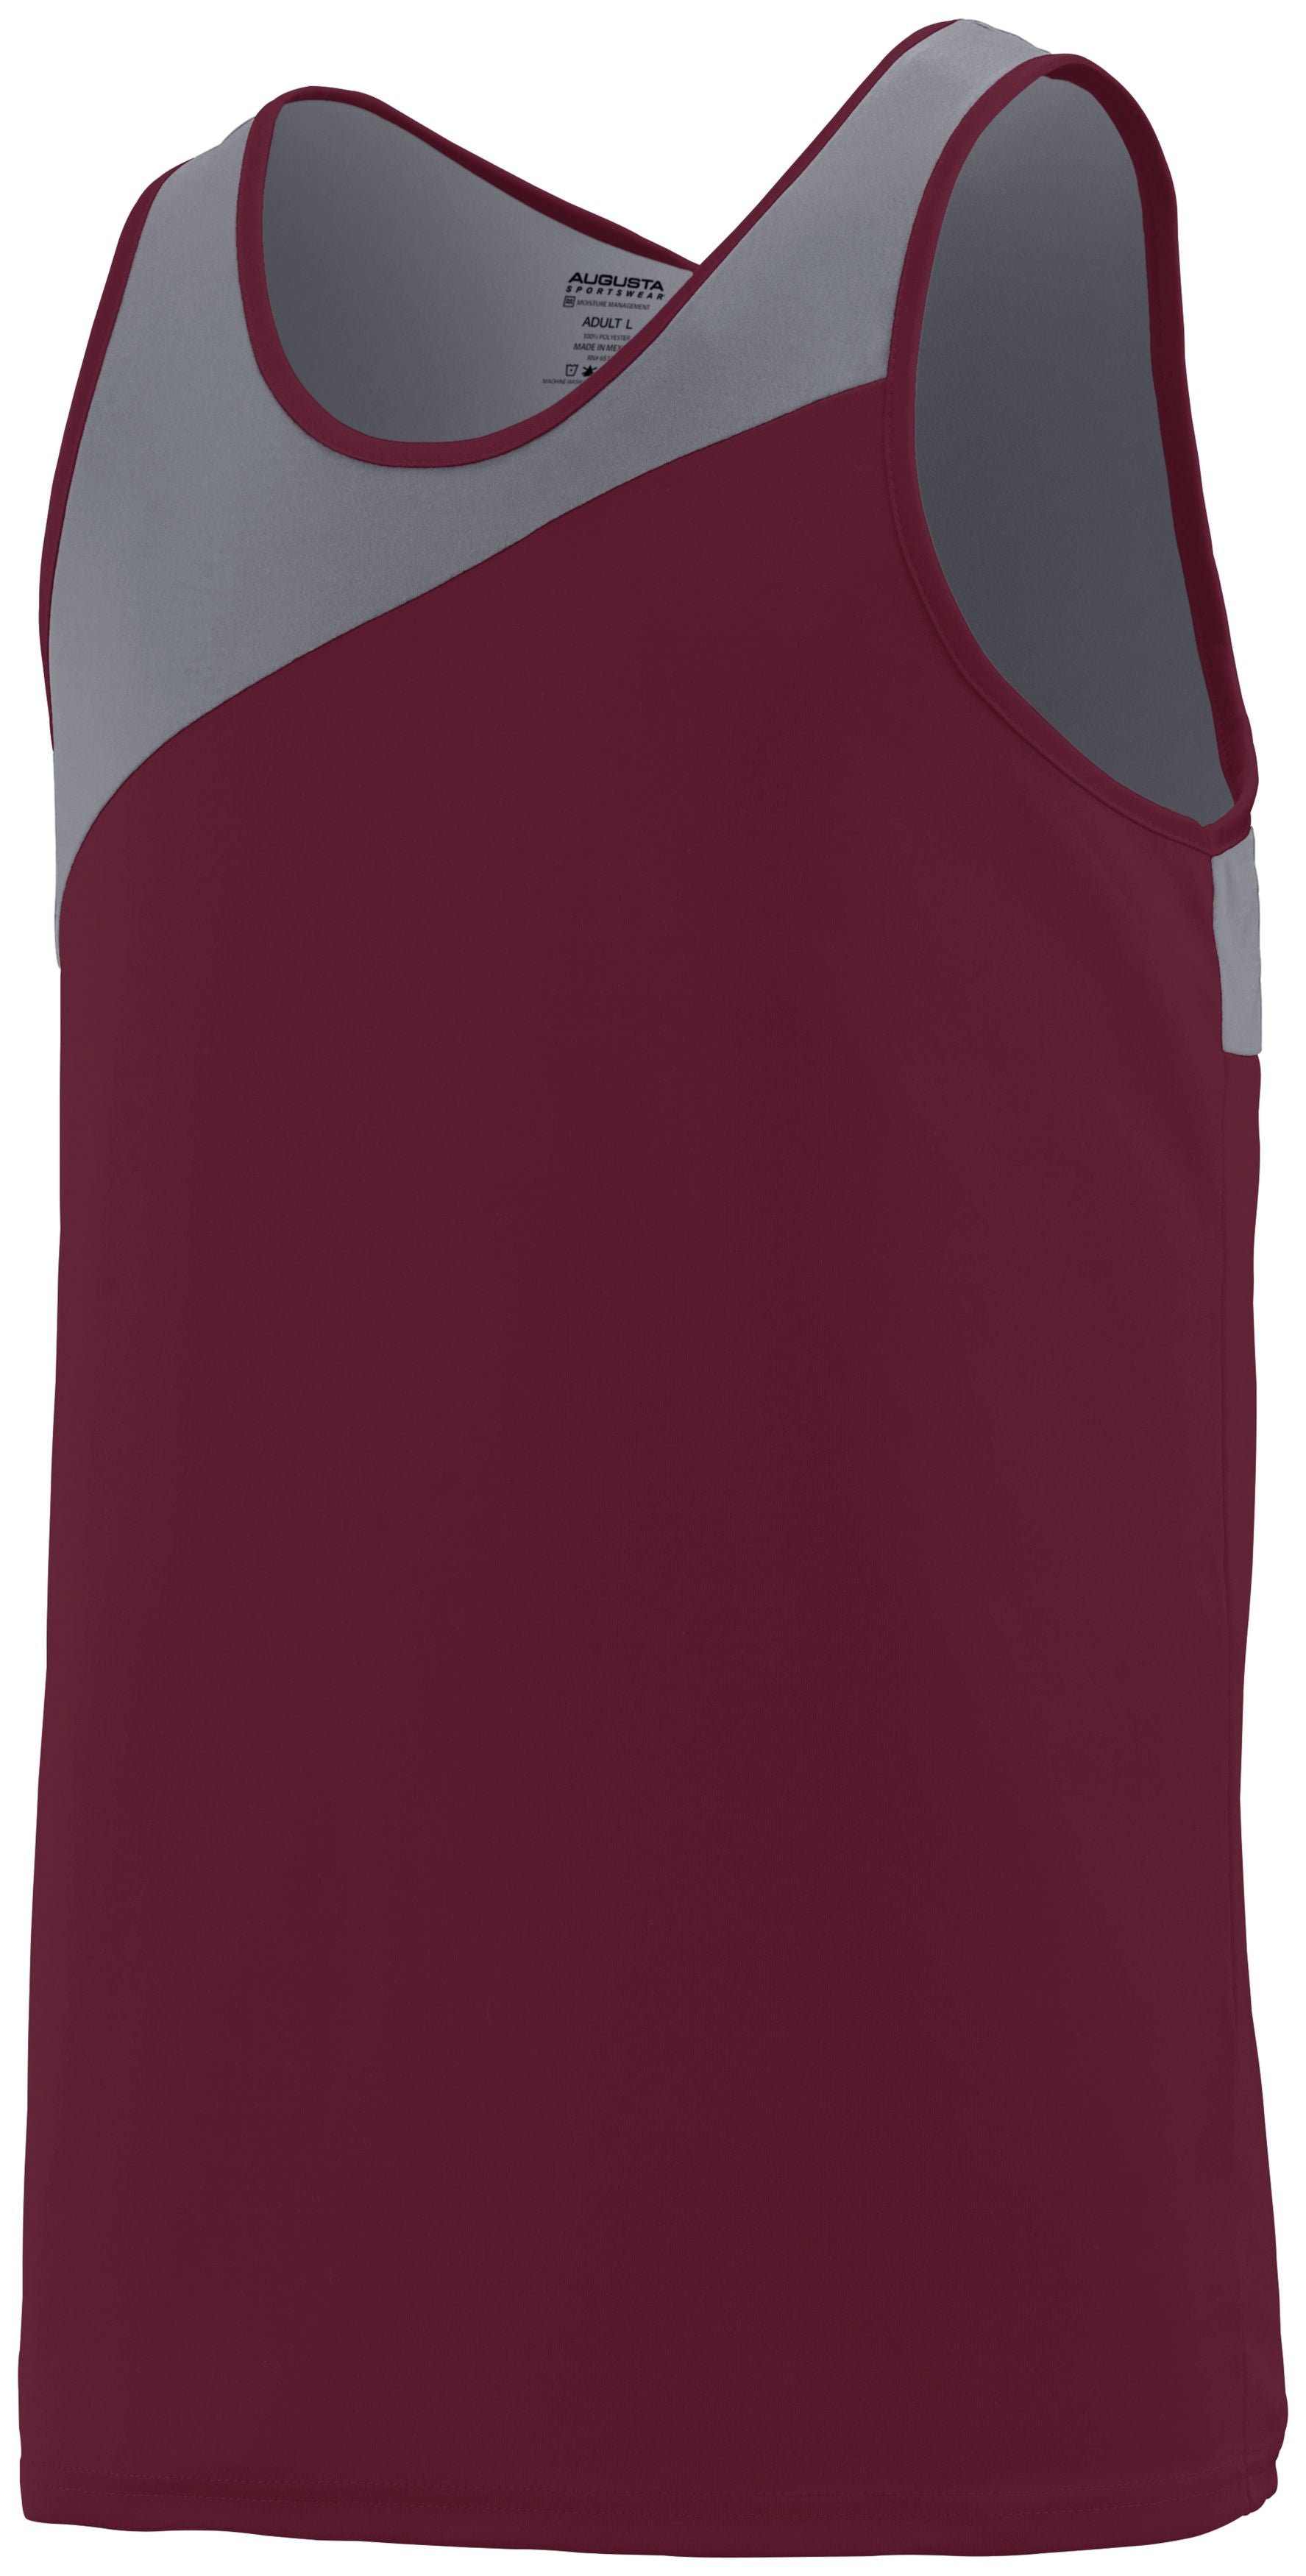 Augusta Sportswear Accelerate Jersey in Maroon/Graphite  -Part of the Adult, Adult-Jersey, Augusta-Products, Track-Field, Shirts product lines at KanaleyCreations.com